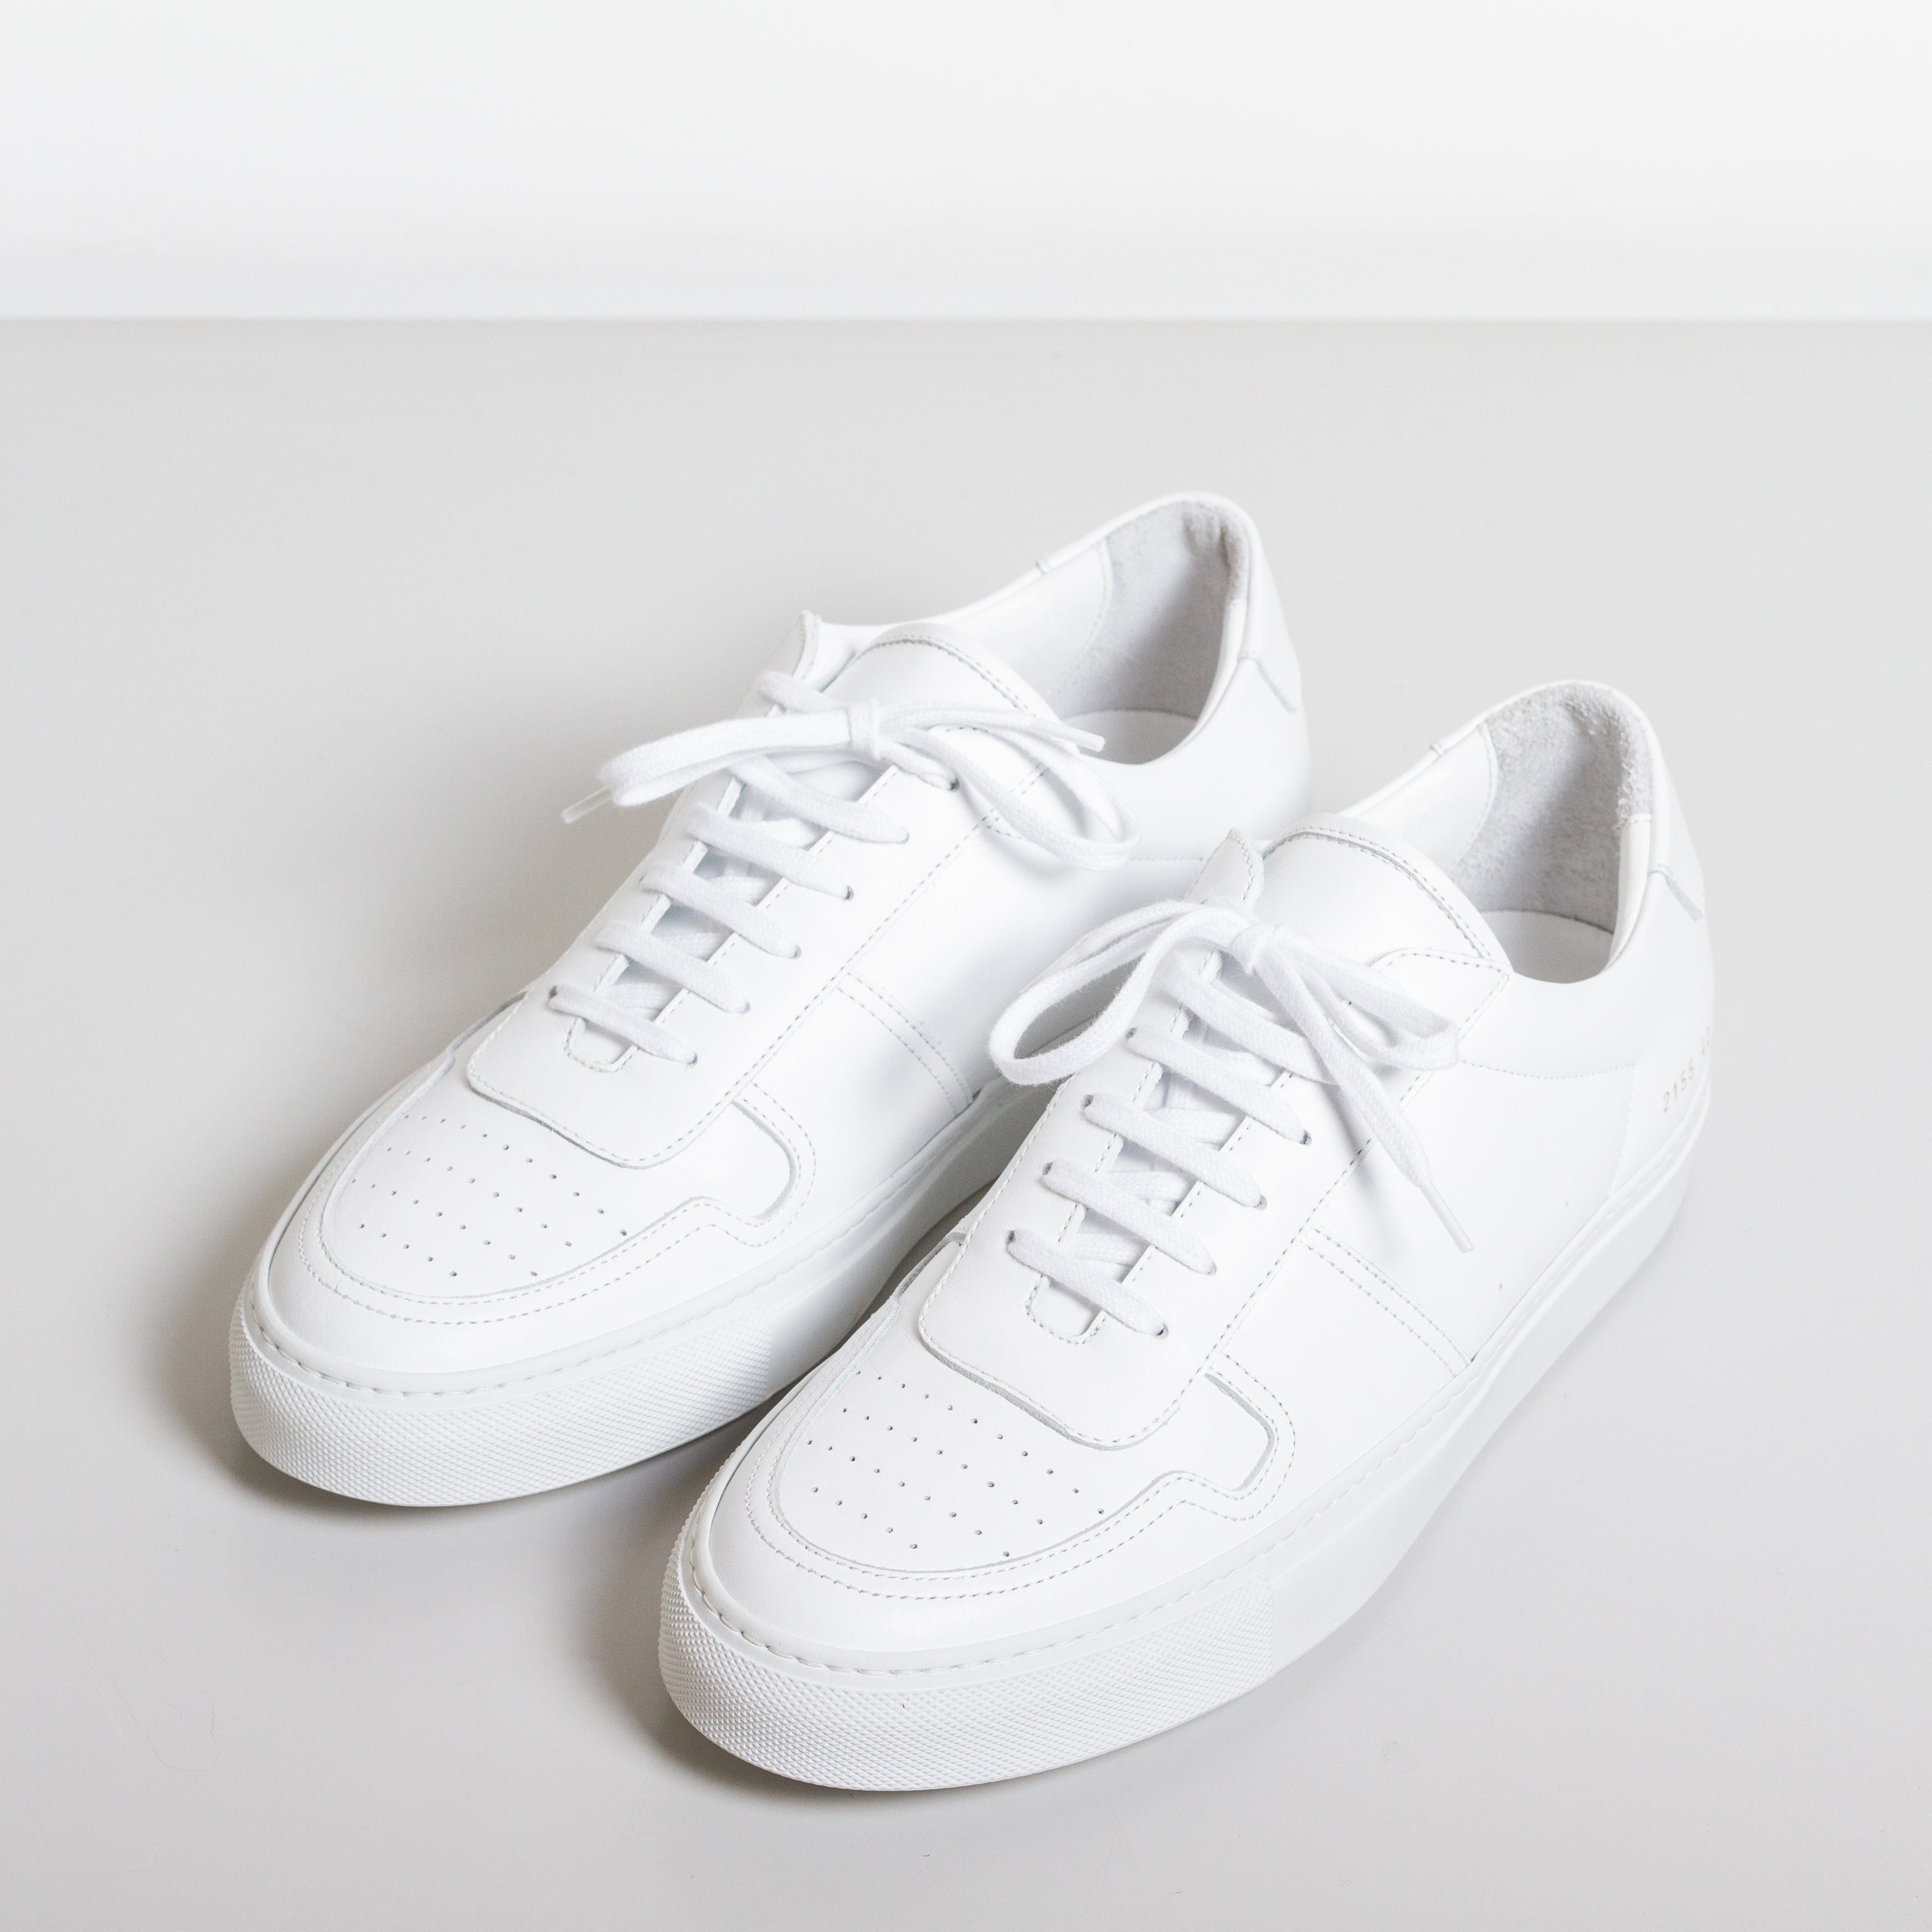 Bball Low - White